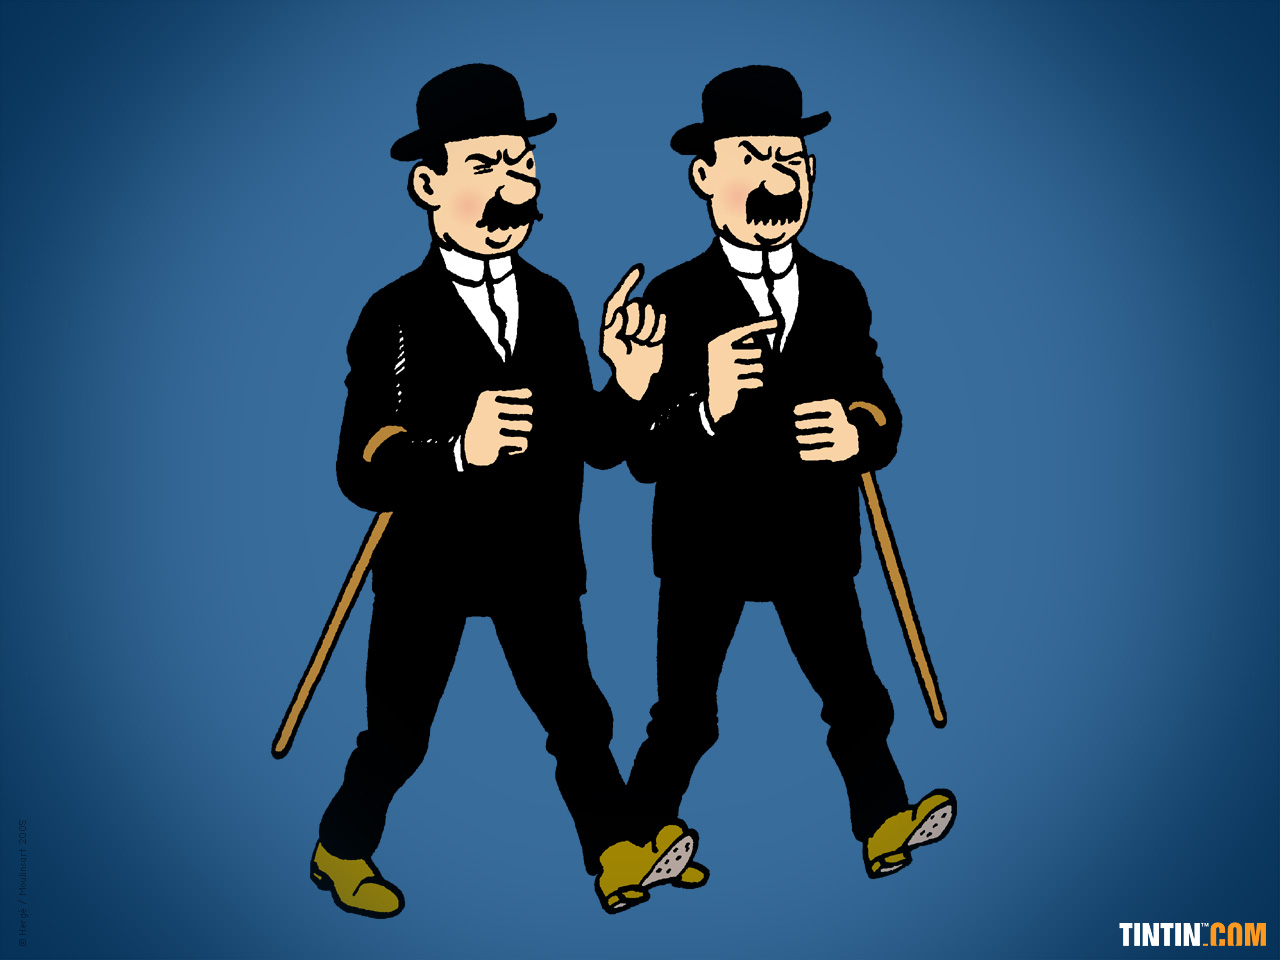 Thompson And Thomson Tintin Detectives Twins Moustache Cane Comic Character Humor 1280x960